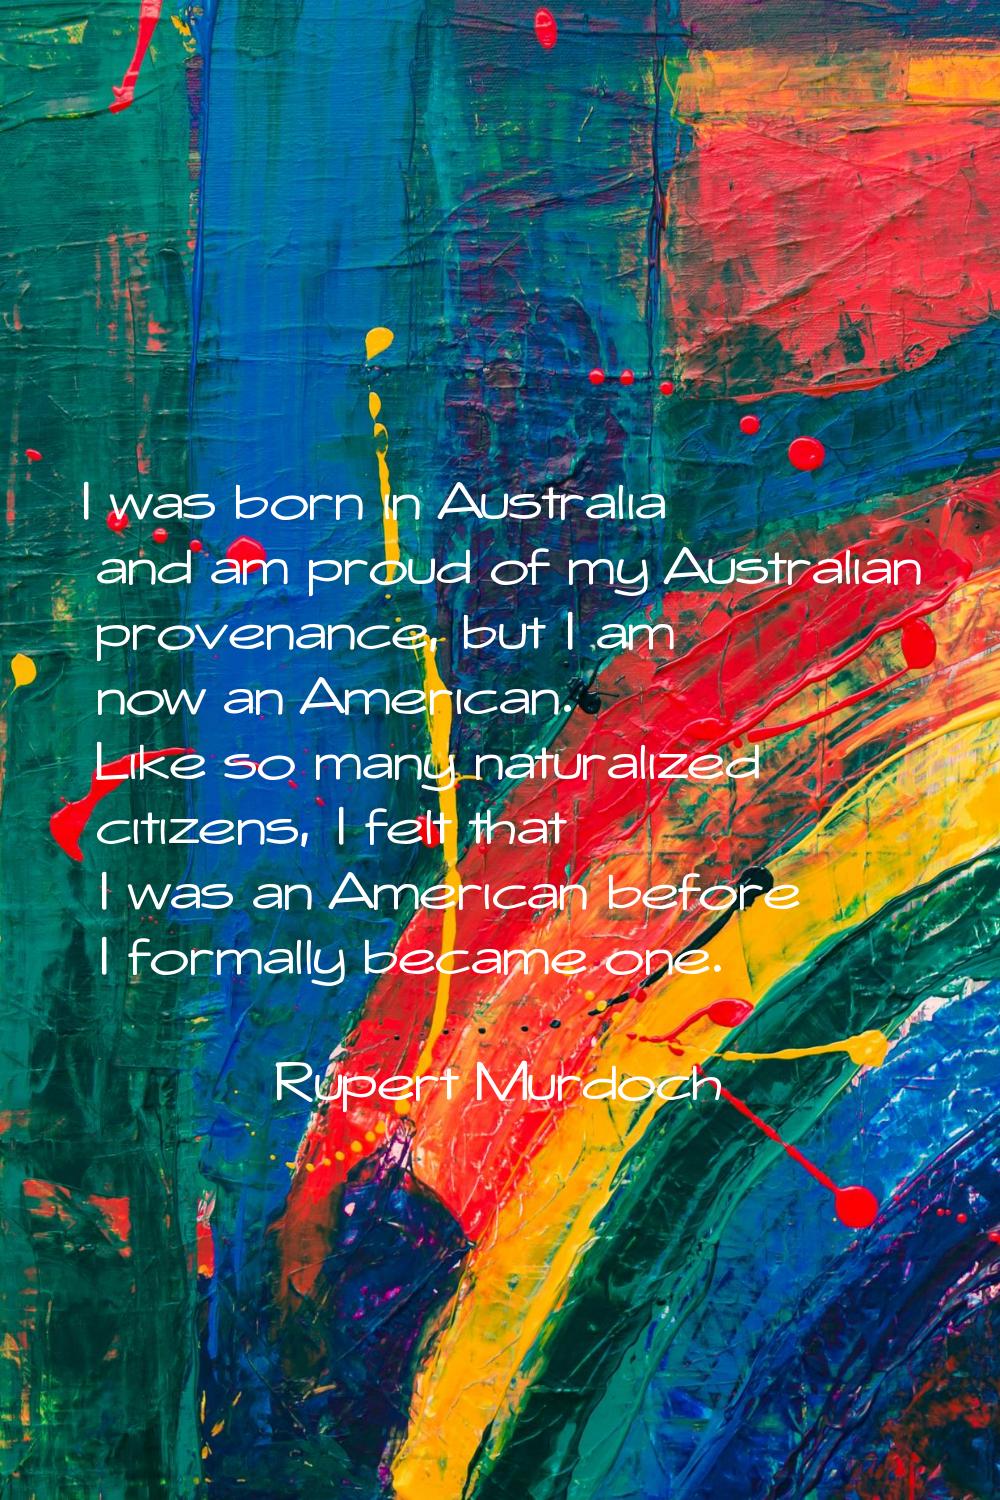 I was born in Australia and am proud of my Australian provenance, but I am now an American. Like so